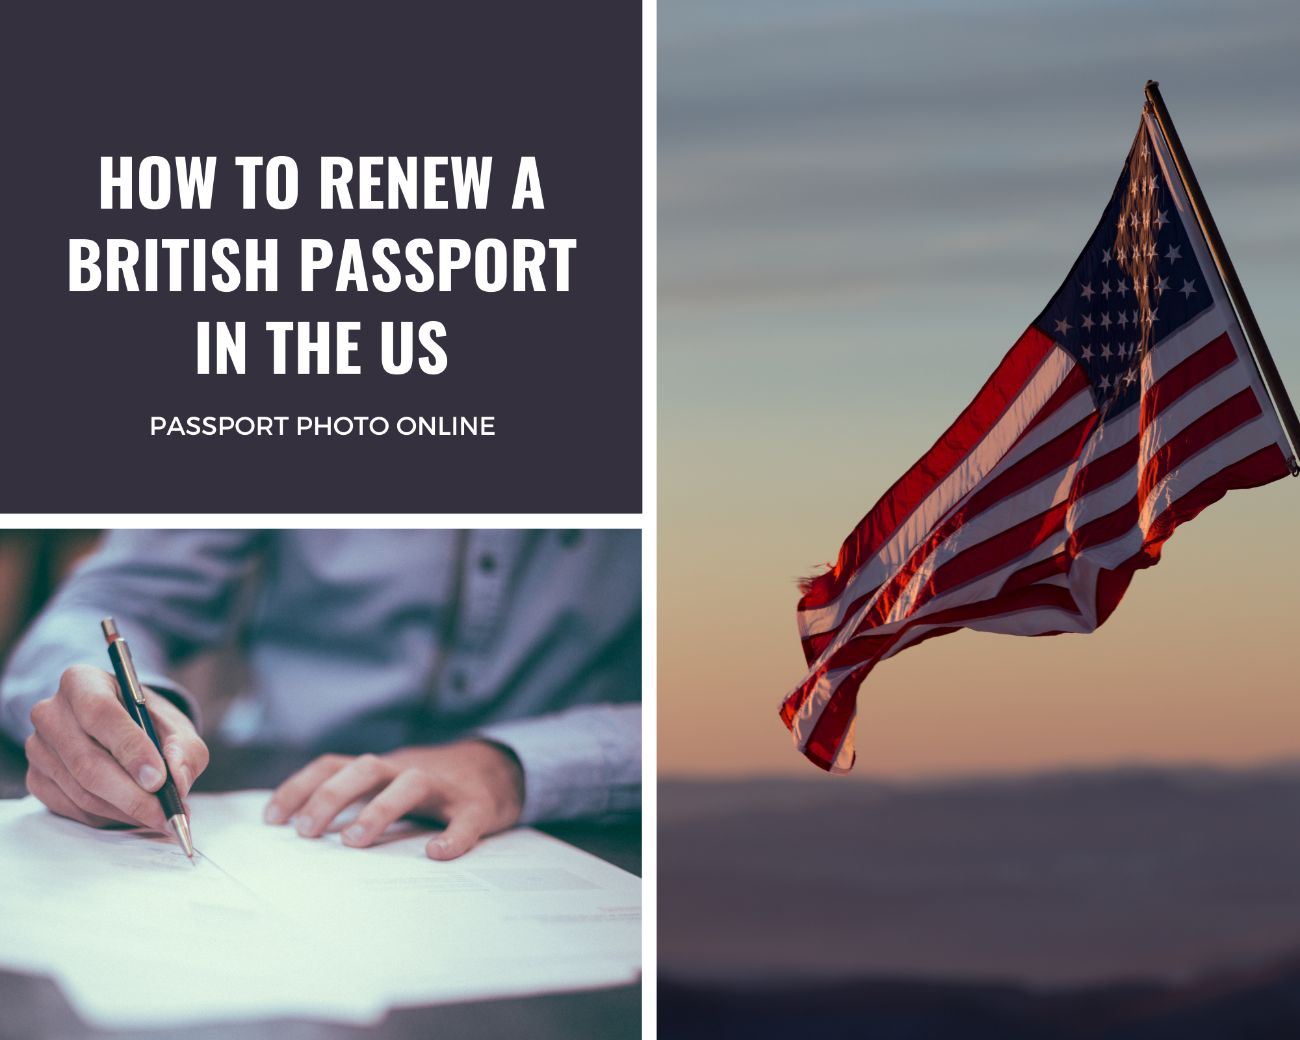 How to renew a British passport in the US